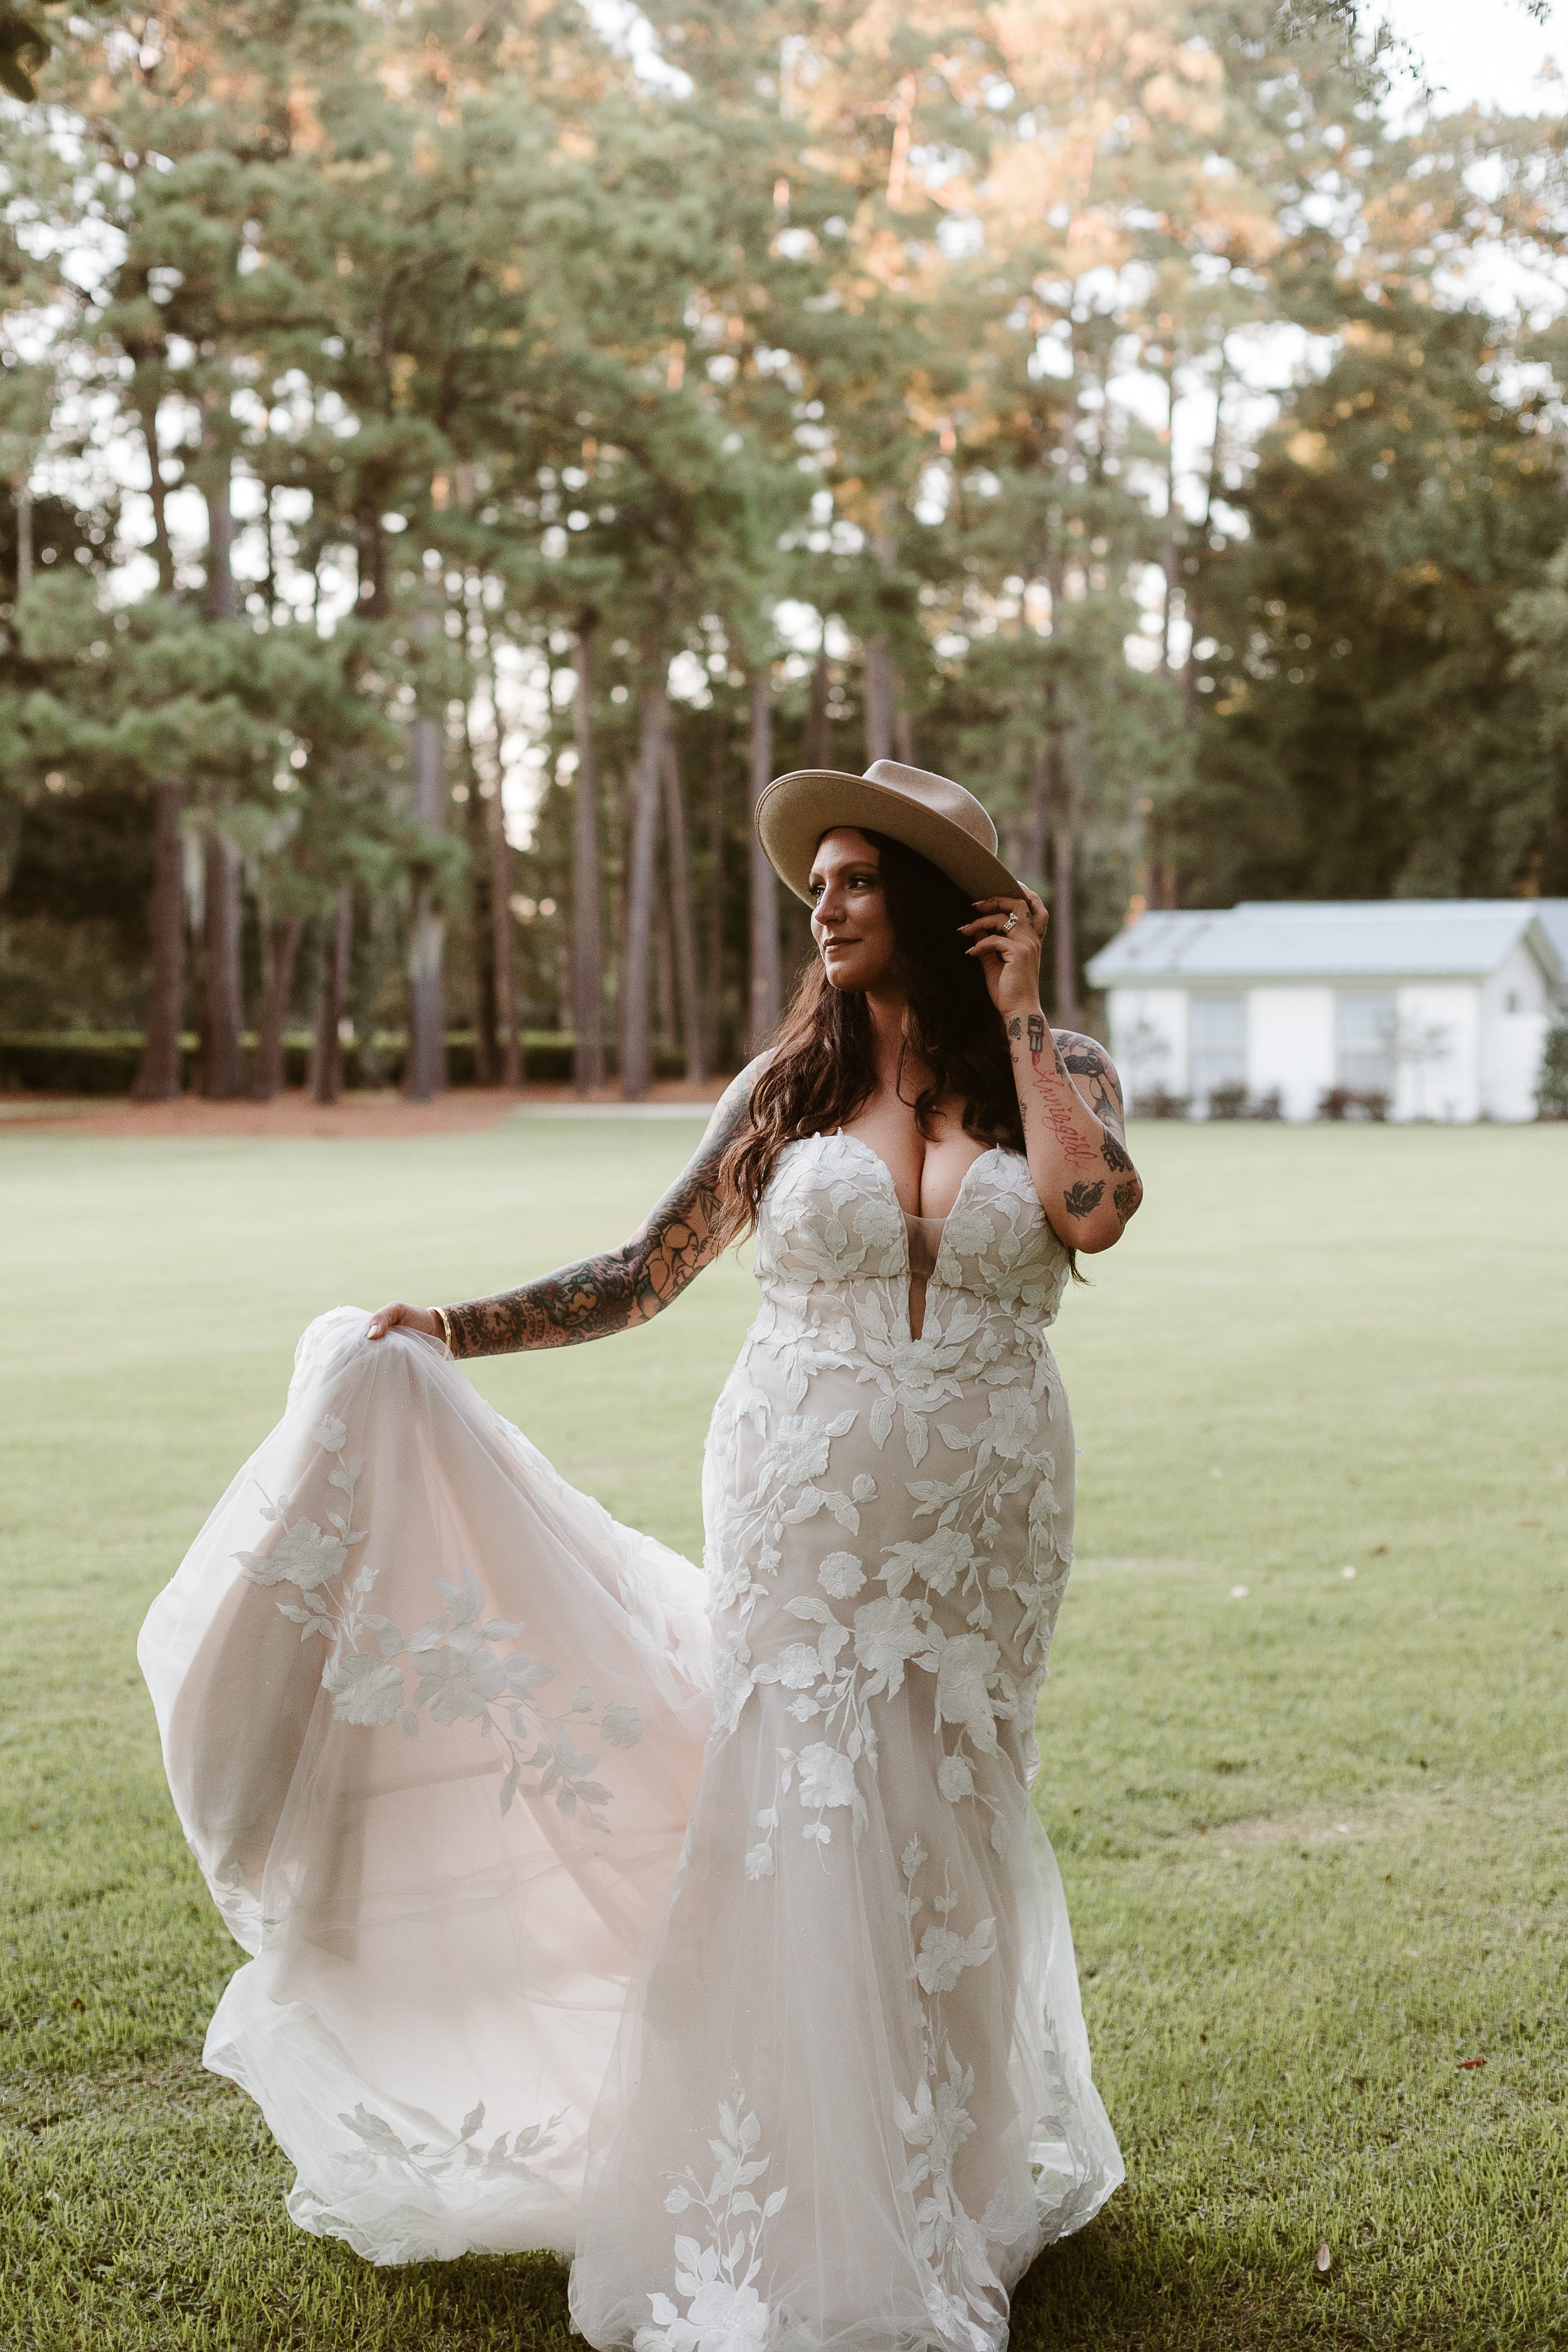 ivory-and-beau-blog-down-for-the-gown-real-bride-rebecca-ingram-wedding-dress-maggie-sottero-bridal-gown-strapless-wedding-dress-wedding-gown-savannah-bridal-shop-savannah-bridal-boutique-savannah-georgia-Annie & Cam Wedding-725.jpg